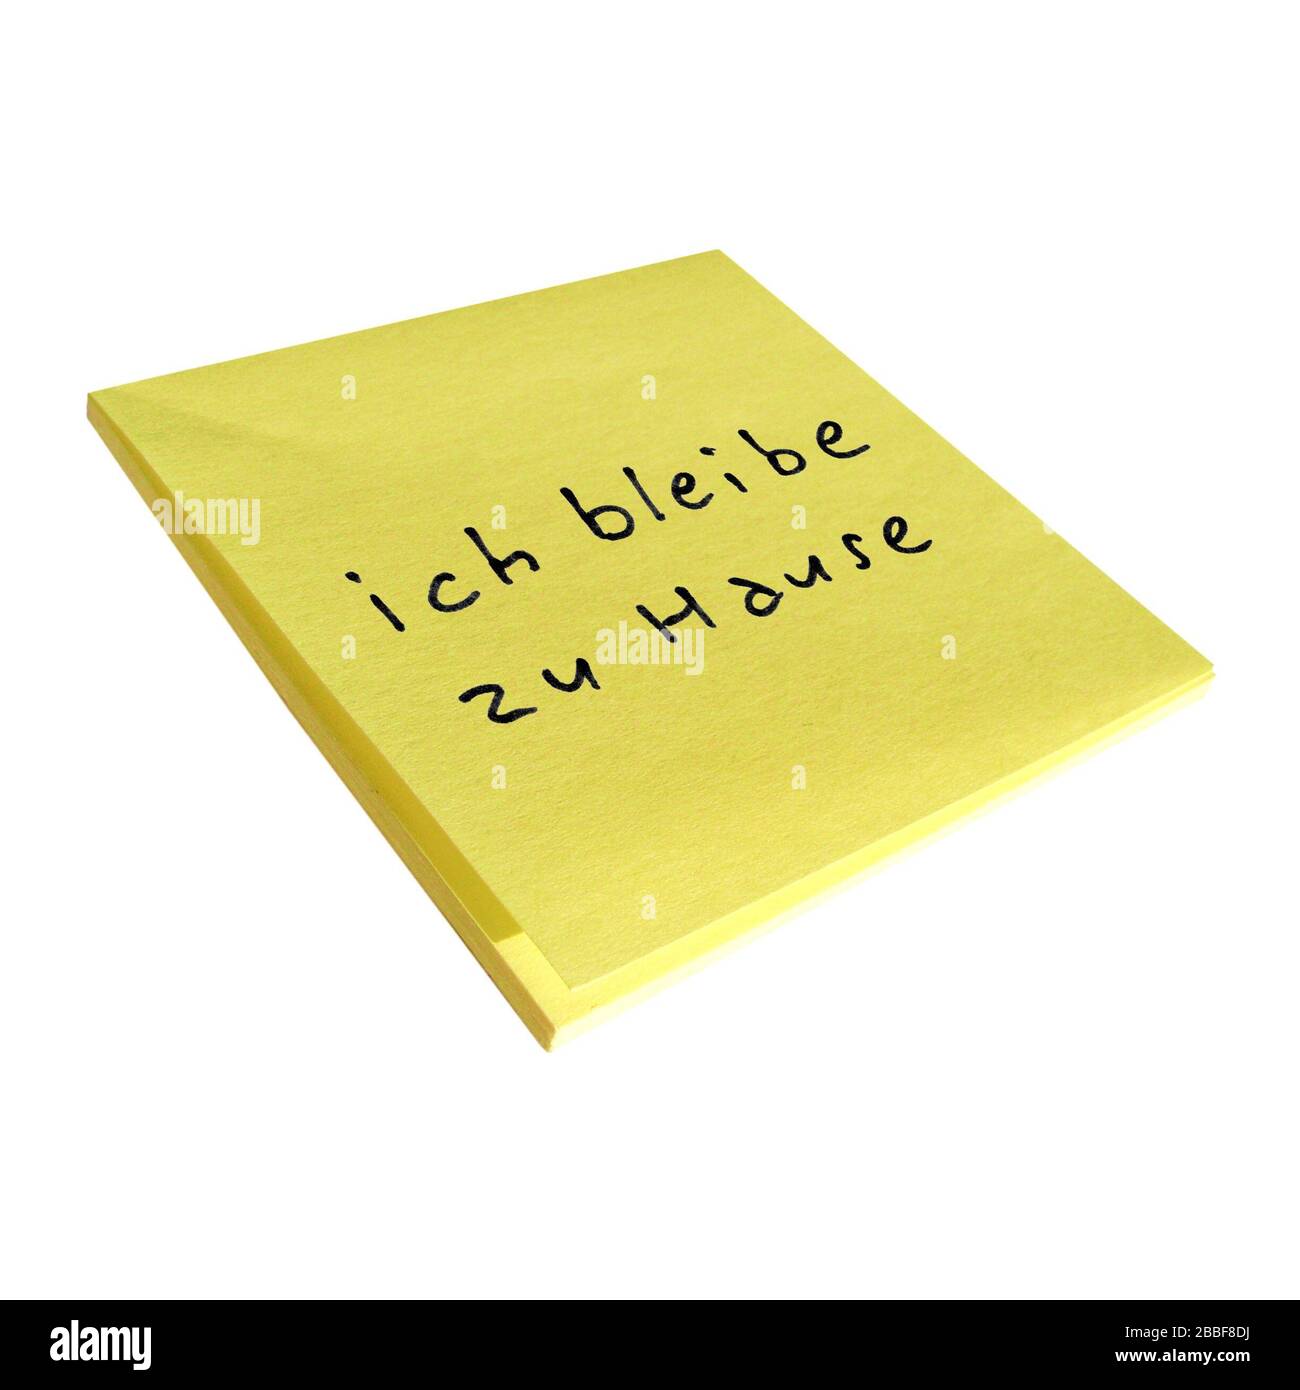 ich bleibe zu Hause (translation: I stay at home) sticky note isolated Stock Photo